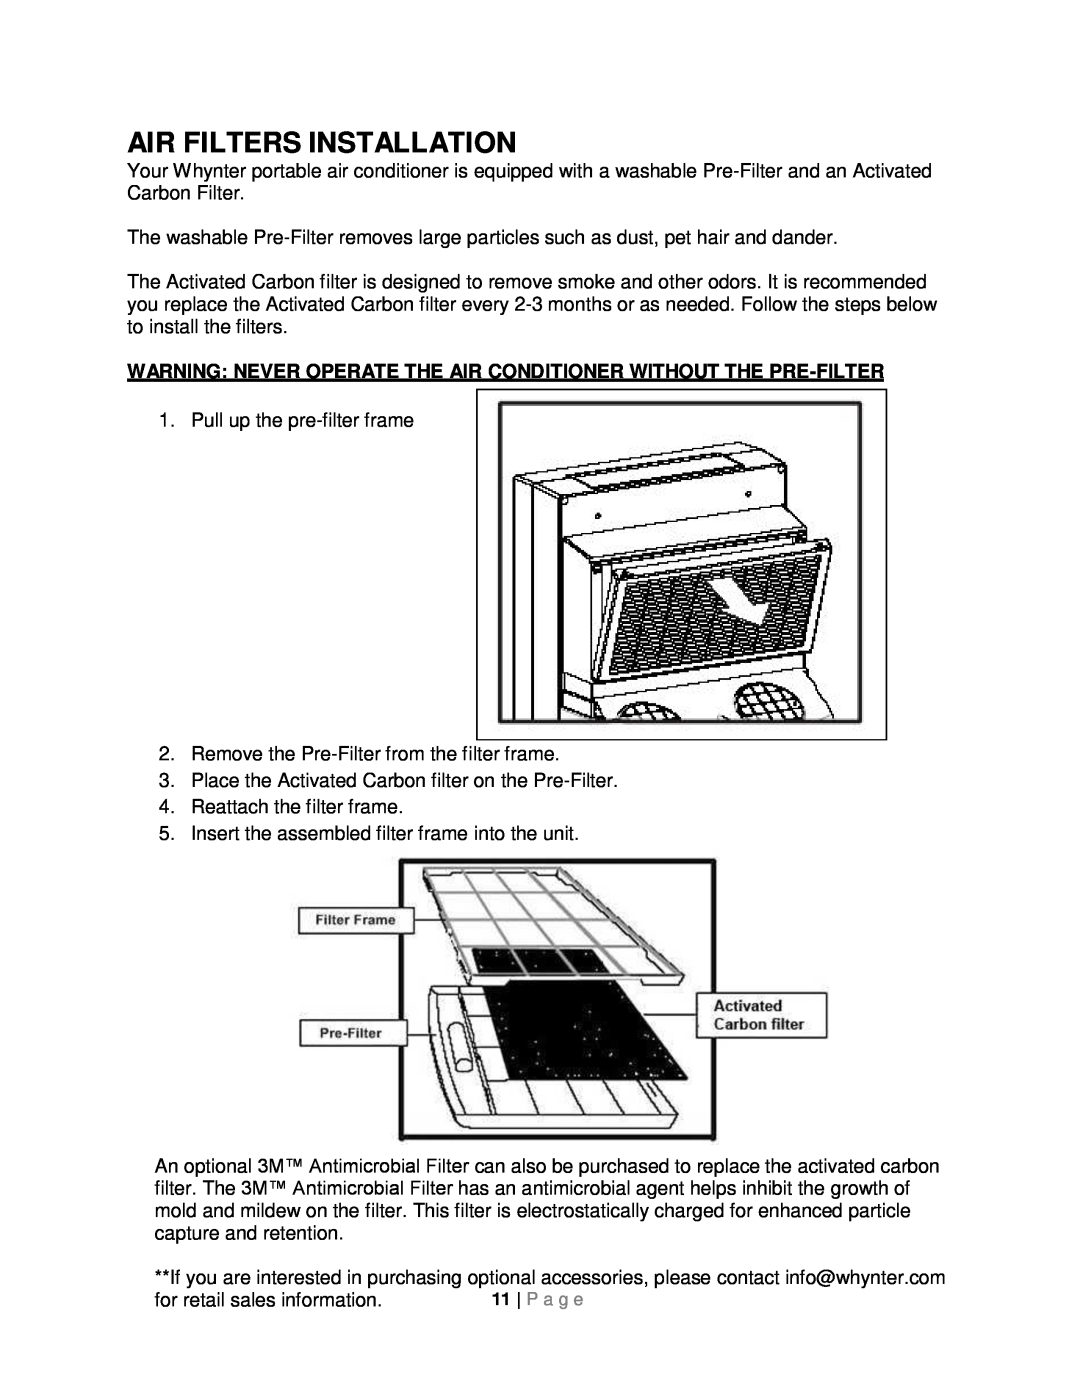 Whynter ARC-14SH instruction manual Air Filters Installation, for retail sales information 